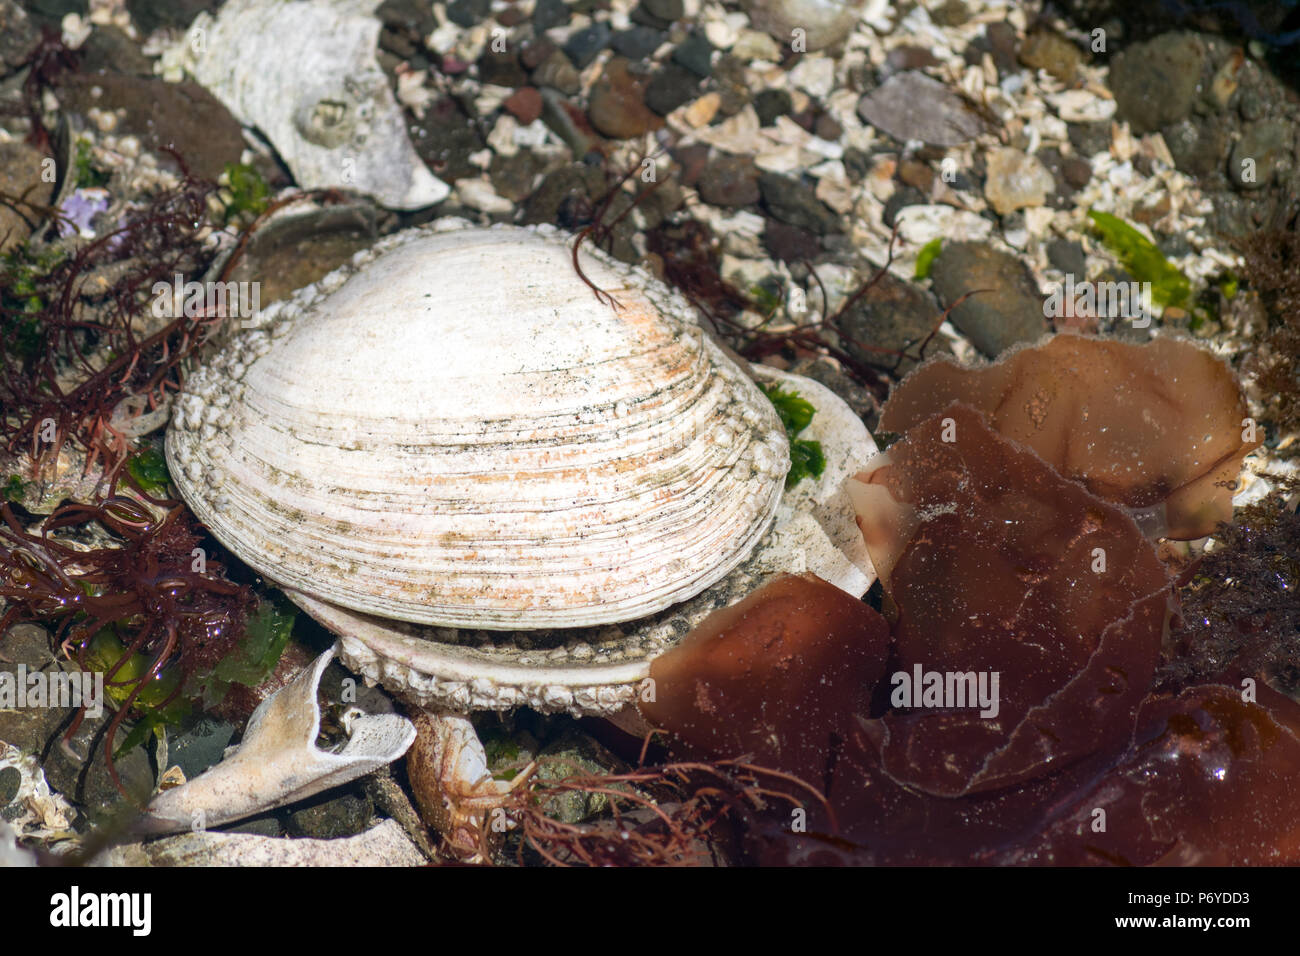 Geoduck clam shell Foto Stock